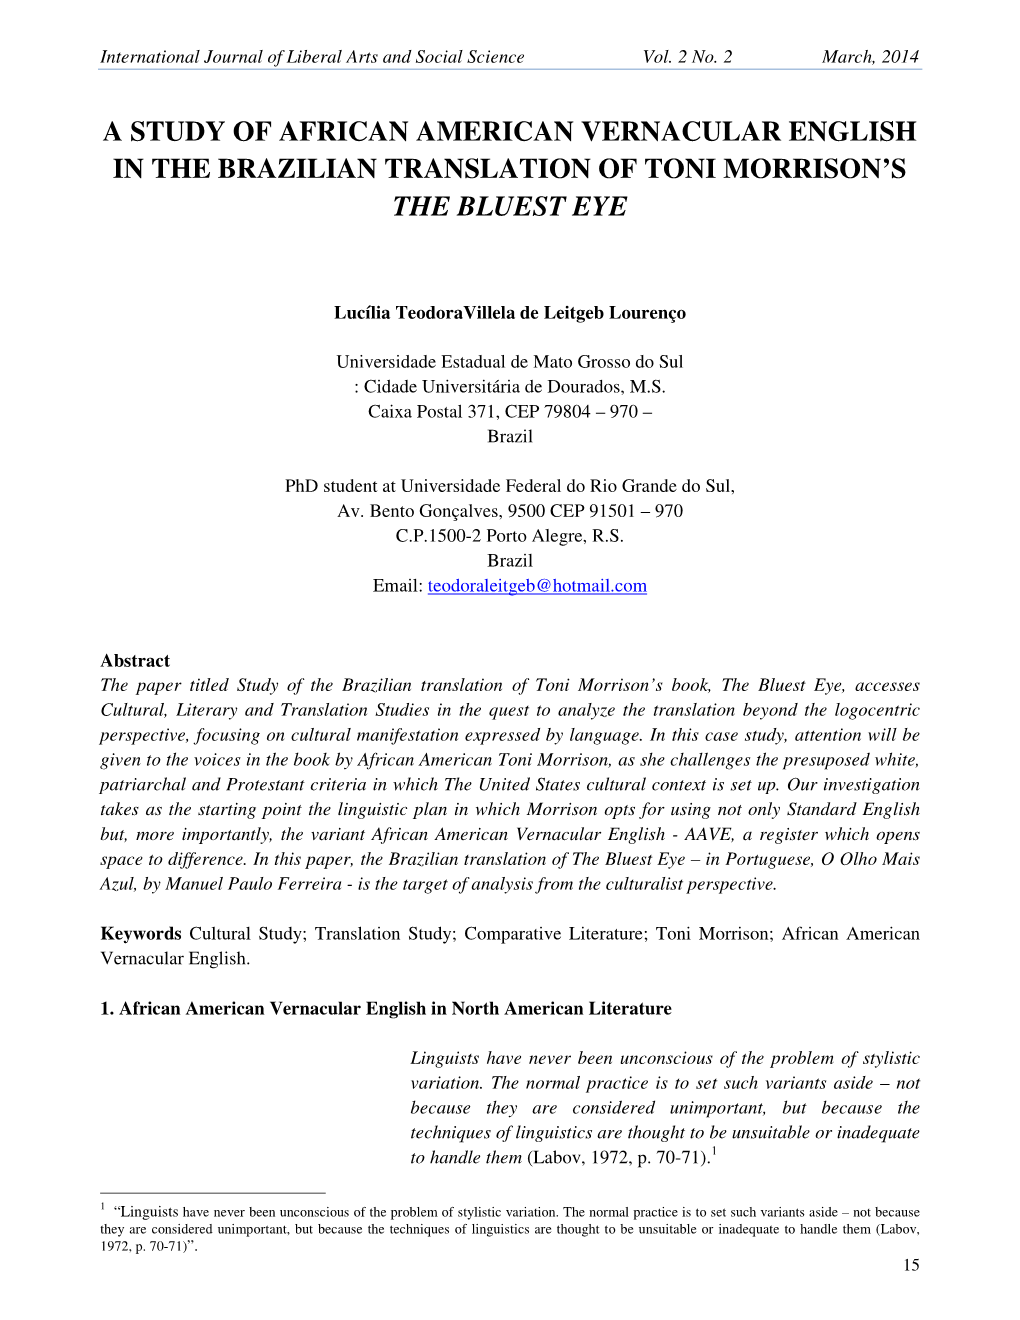 A Study of African American Vernacular English in the Brazilian Translation of Toni Morrison’S the Bluest Eye